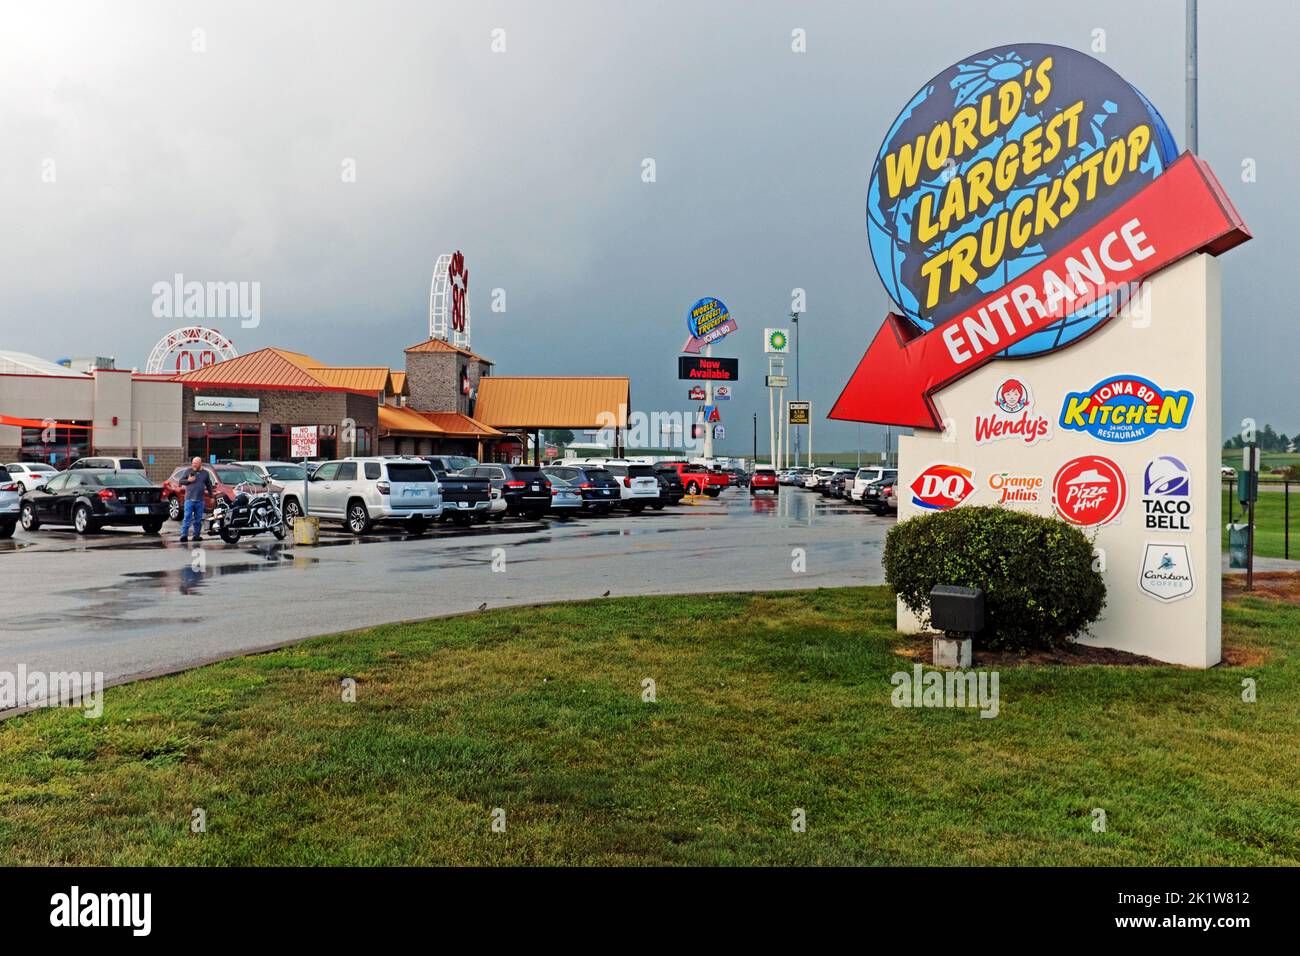 Established in 1964, Iowa 80 has become the World's Largest Truck Stop, servicing the trucking and traveler industry in Walcott, Iowa. Stock Photo